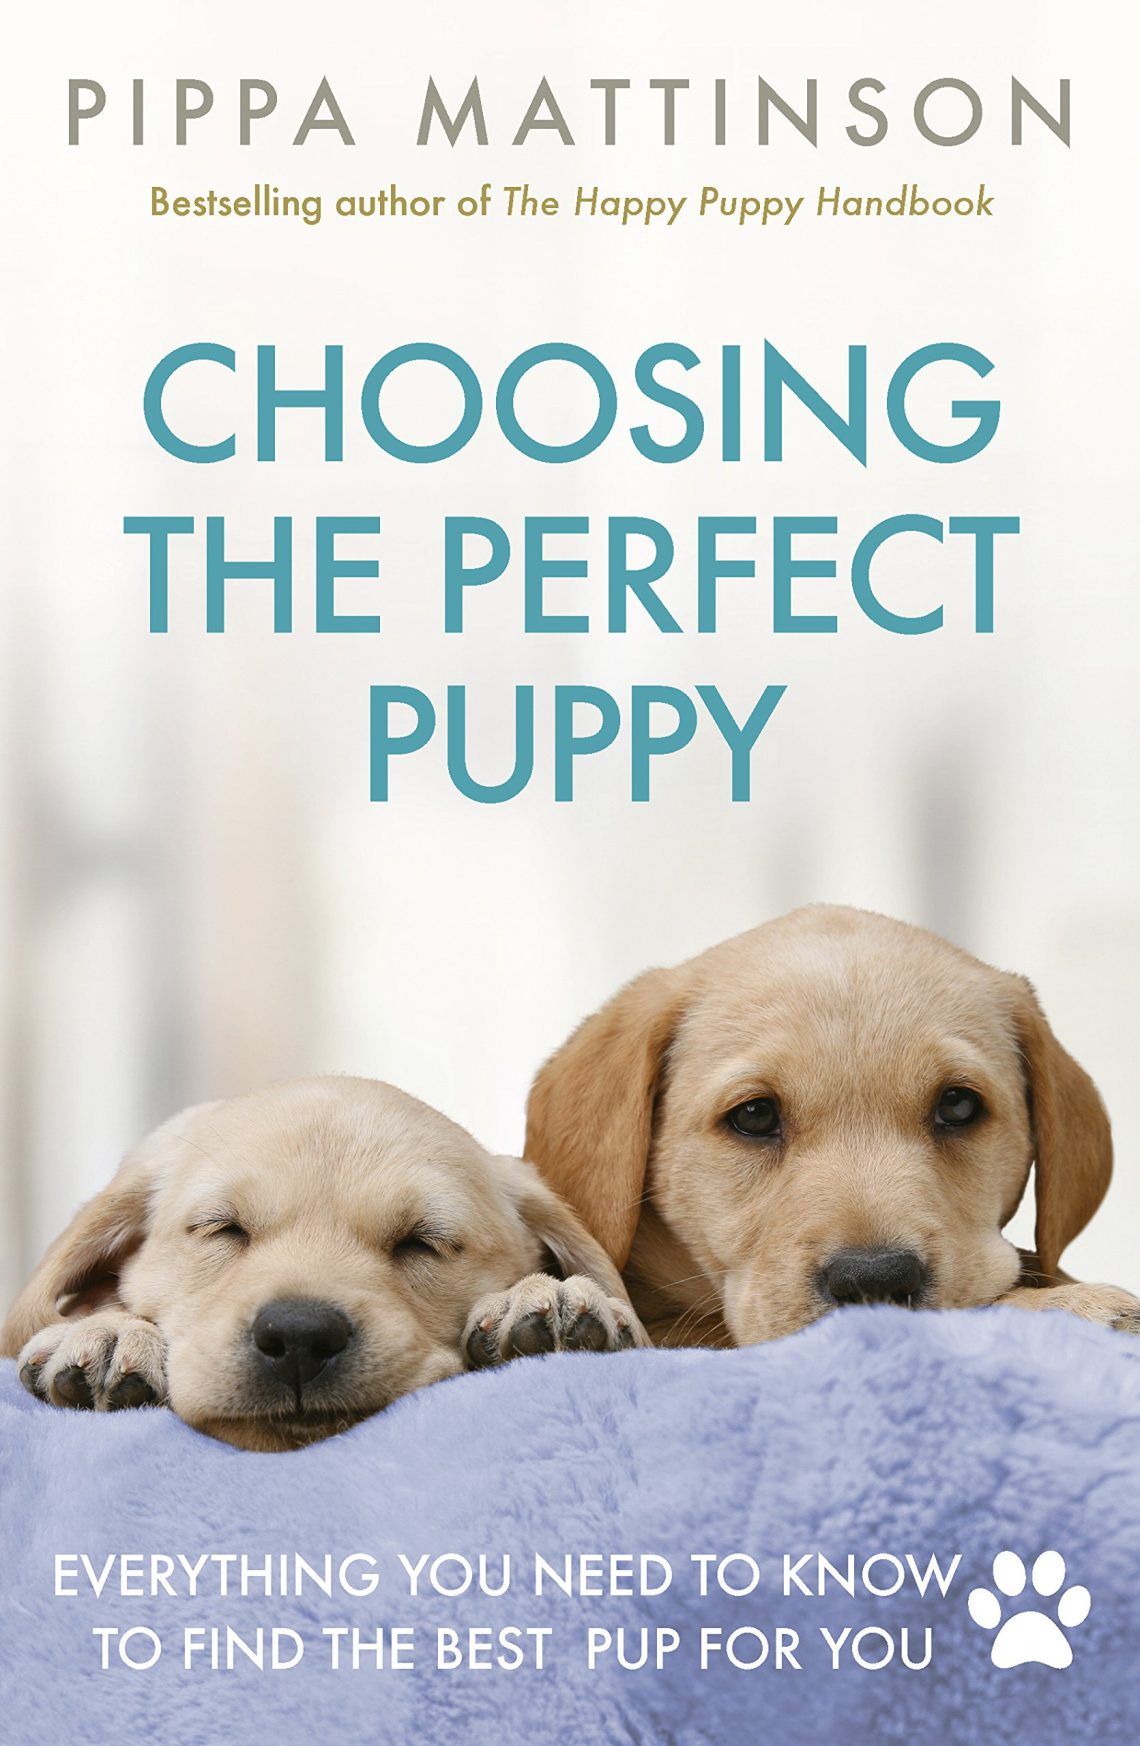 How to choose the perfect puppy?